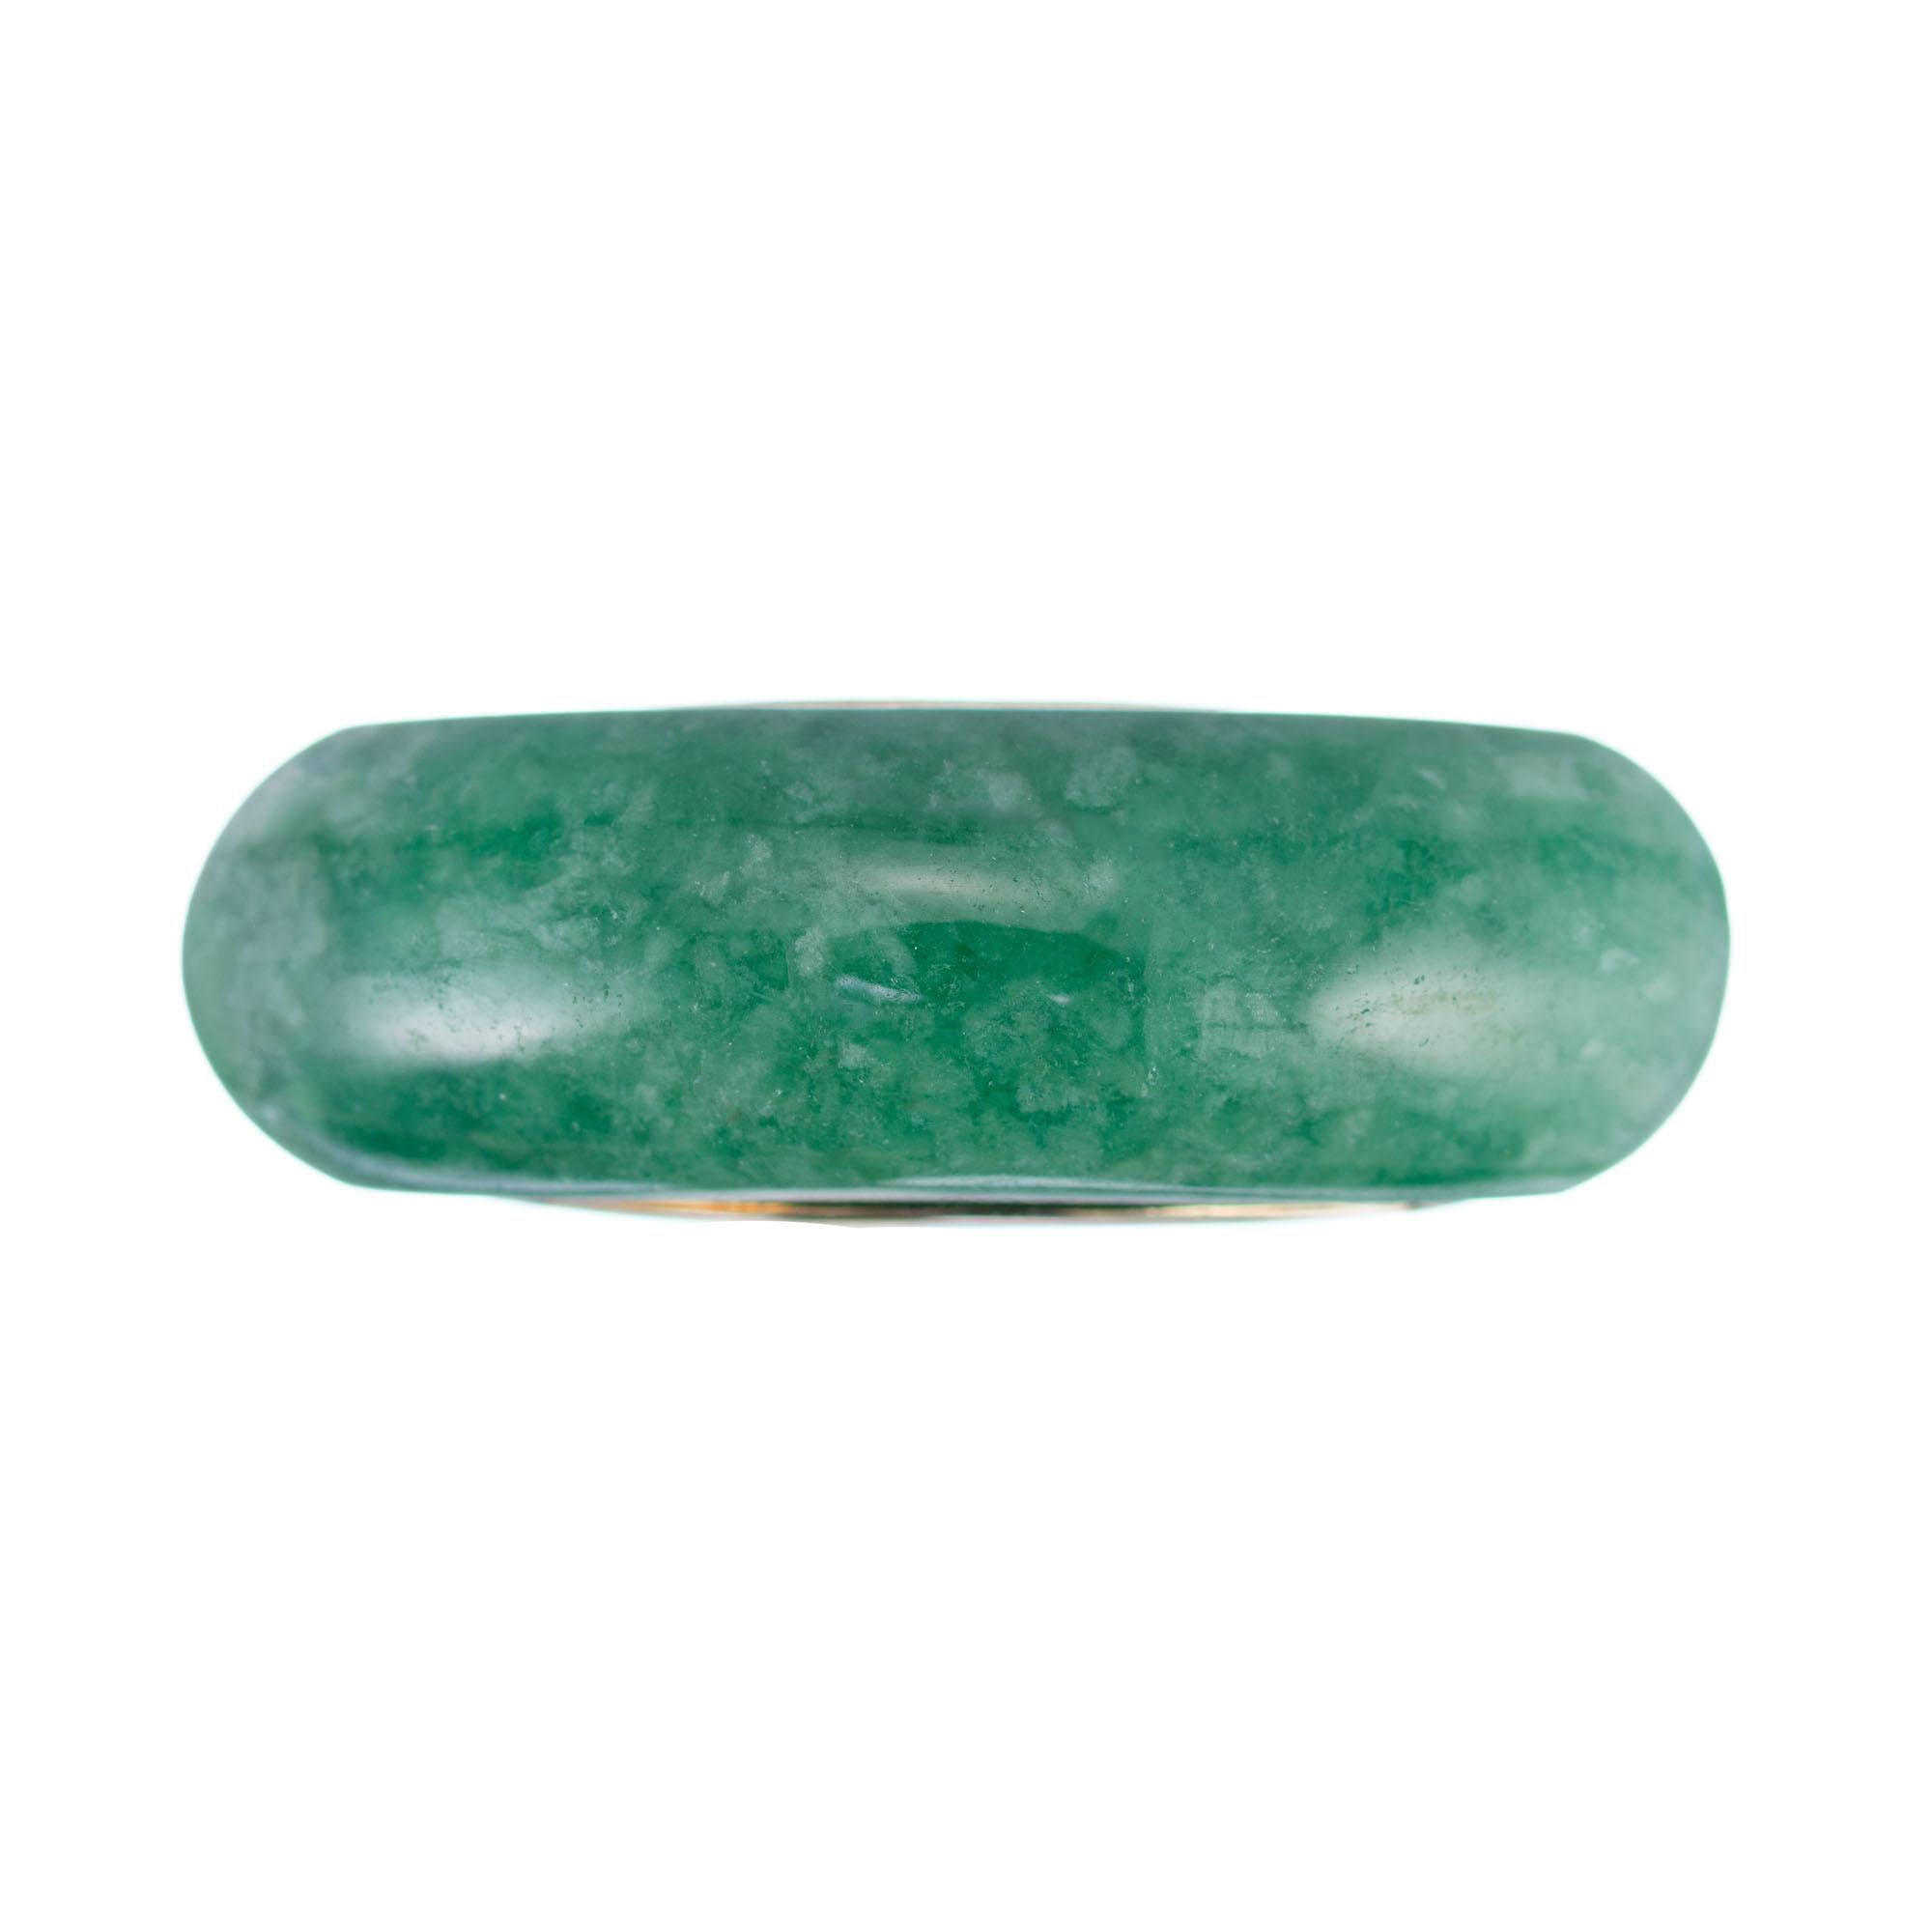 1950s GIA certified natural untreated Jadeite Jade solid 18k yellow gold saddle ring.

1 oval green arc shape cabochon untreated Jadeite Jade, 25.03 x 7.94 x 5.54mm, GIA certificate #2175214420
Size 7.75 and sizable
18k yellow gold
Tested and